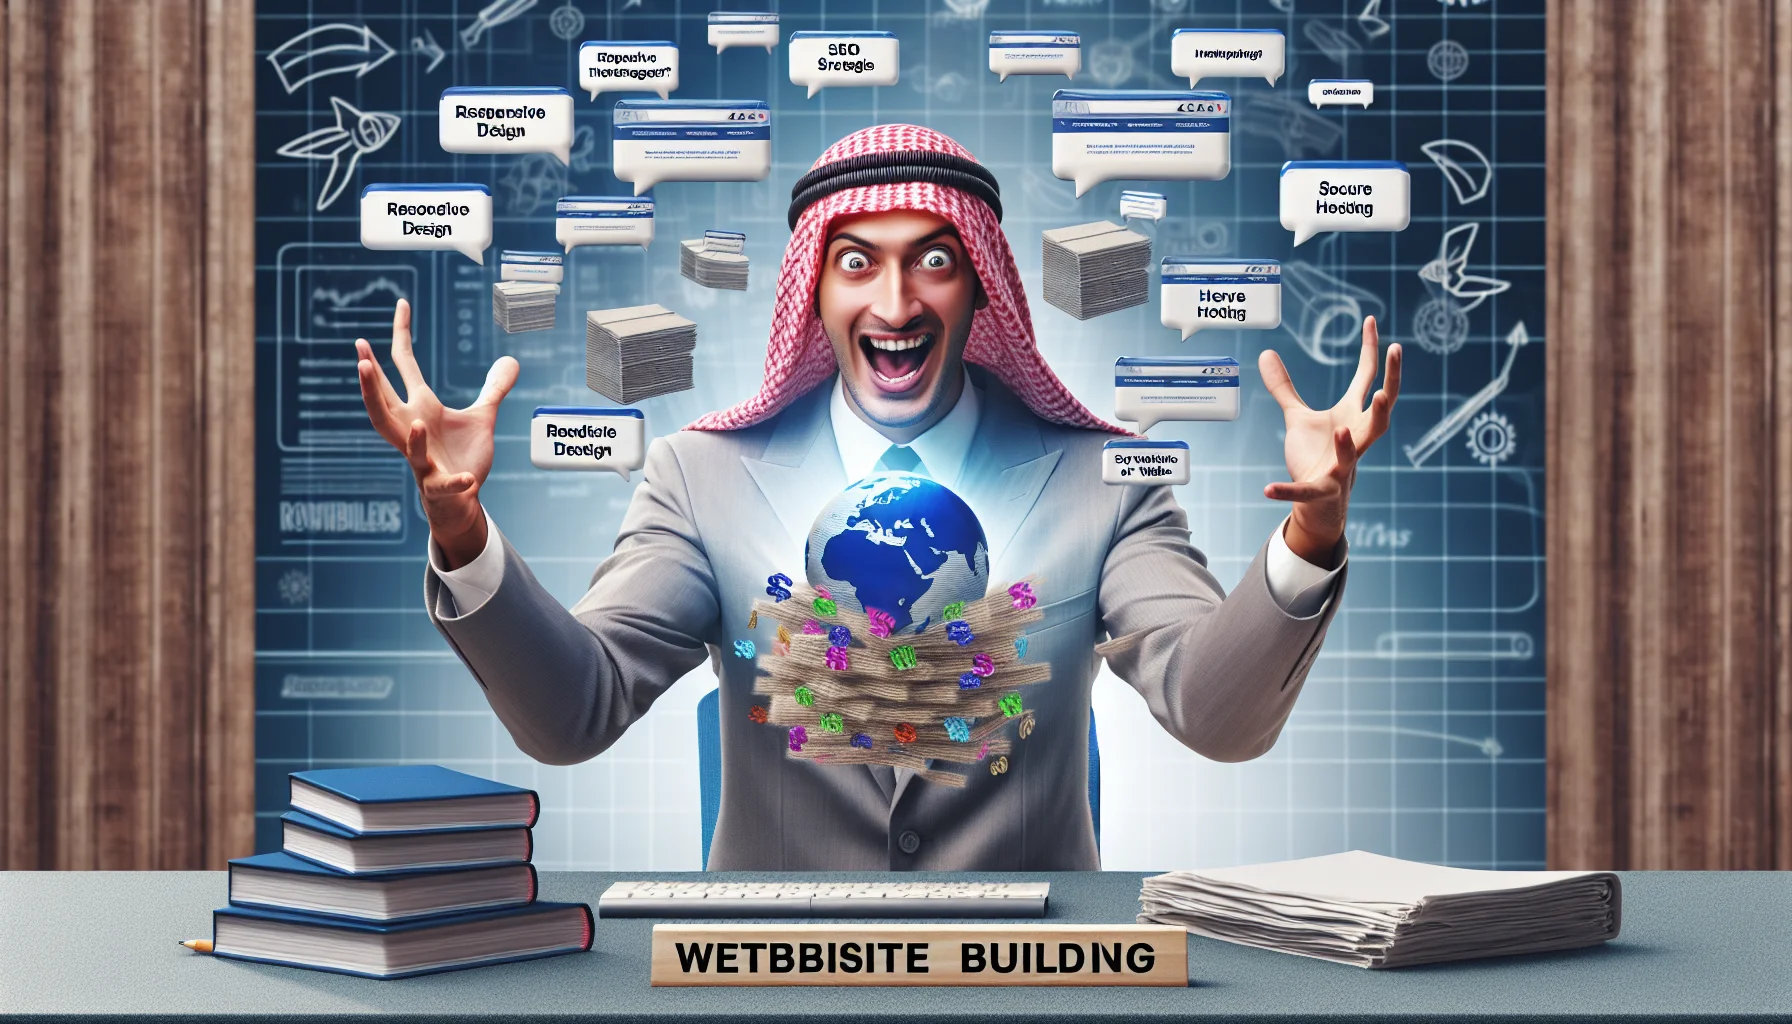 Create a realistic image showcasing a humorous scenario related to website building. This is characterized by a male website builder, of Middle-Eastern descent, enthusiastically demonstrating the process of constructing a website. He is surrounded by 3D images of websites floating above his hands, underlying the key elements such as responsive design, SEO strategies, secure hosting, and user-friendly interfaces. This scene is enclosed within a wider setting imitating an energetic, entertaining infomercial or advertisement.